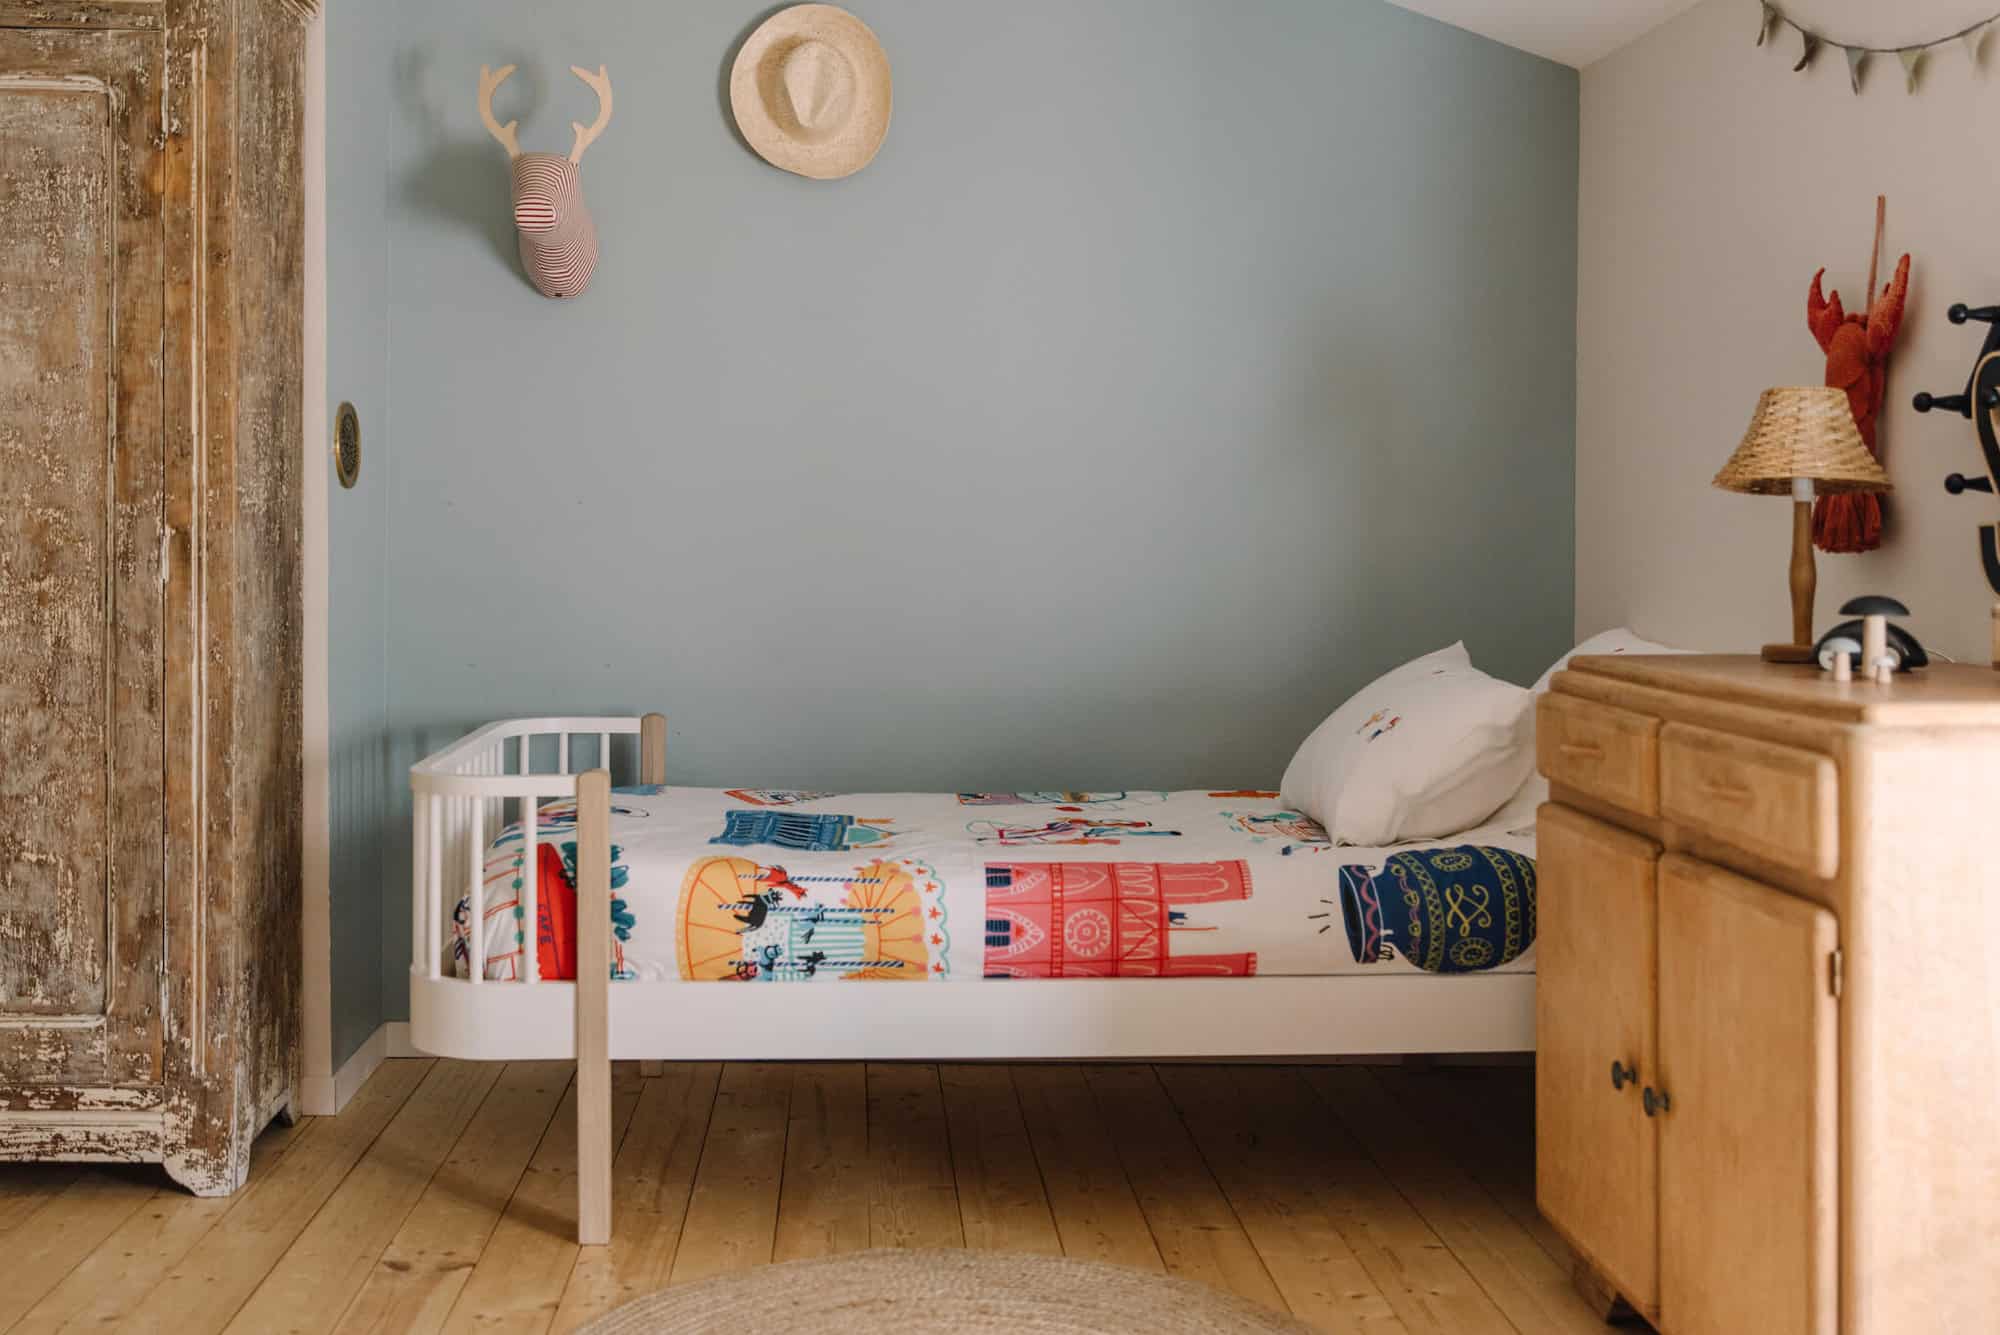 A children's bedroom is pictured, with one light blue wall and one white. The bedspread features large colorful images including a carousel and a hot air balloon.  